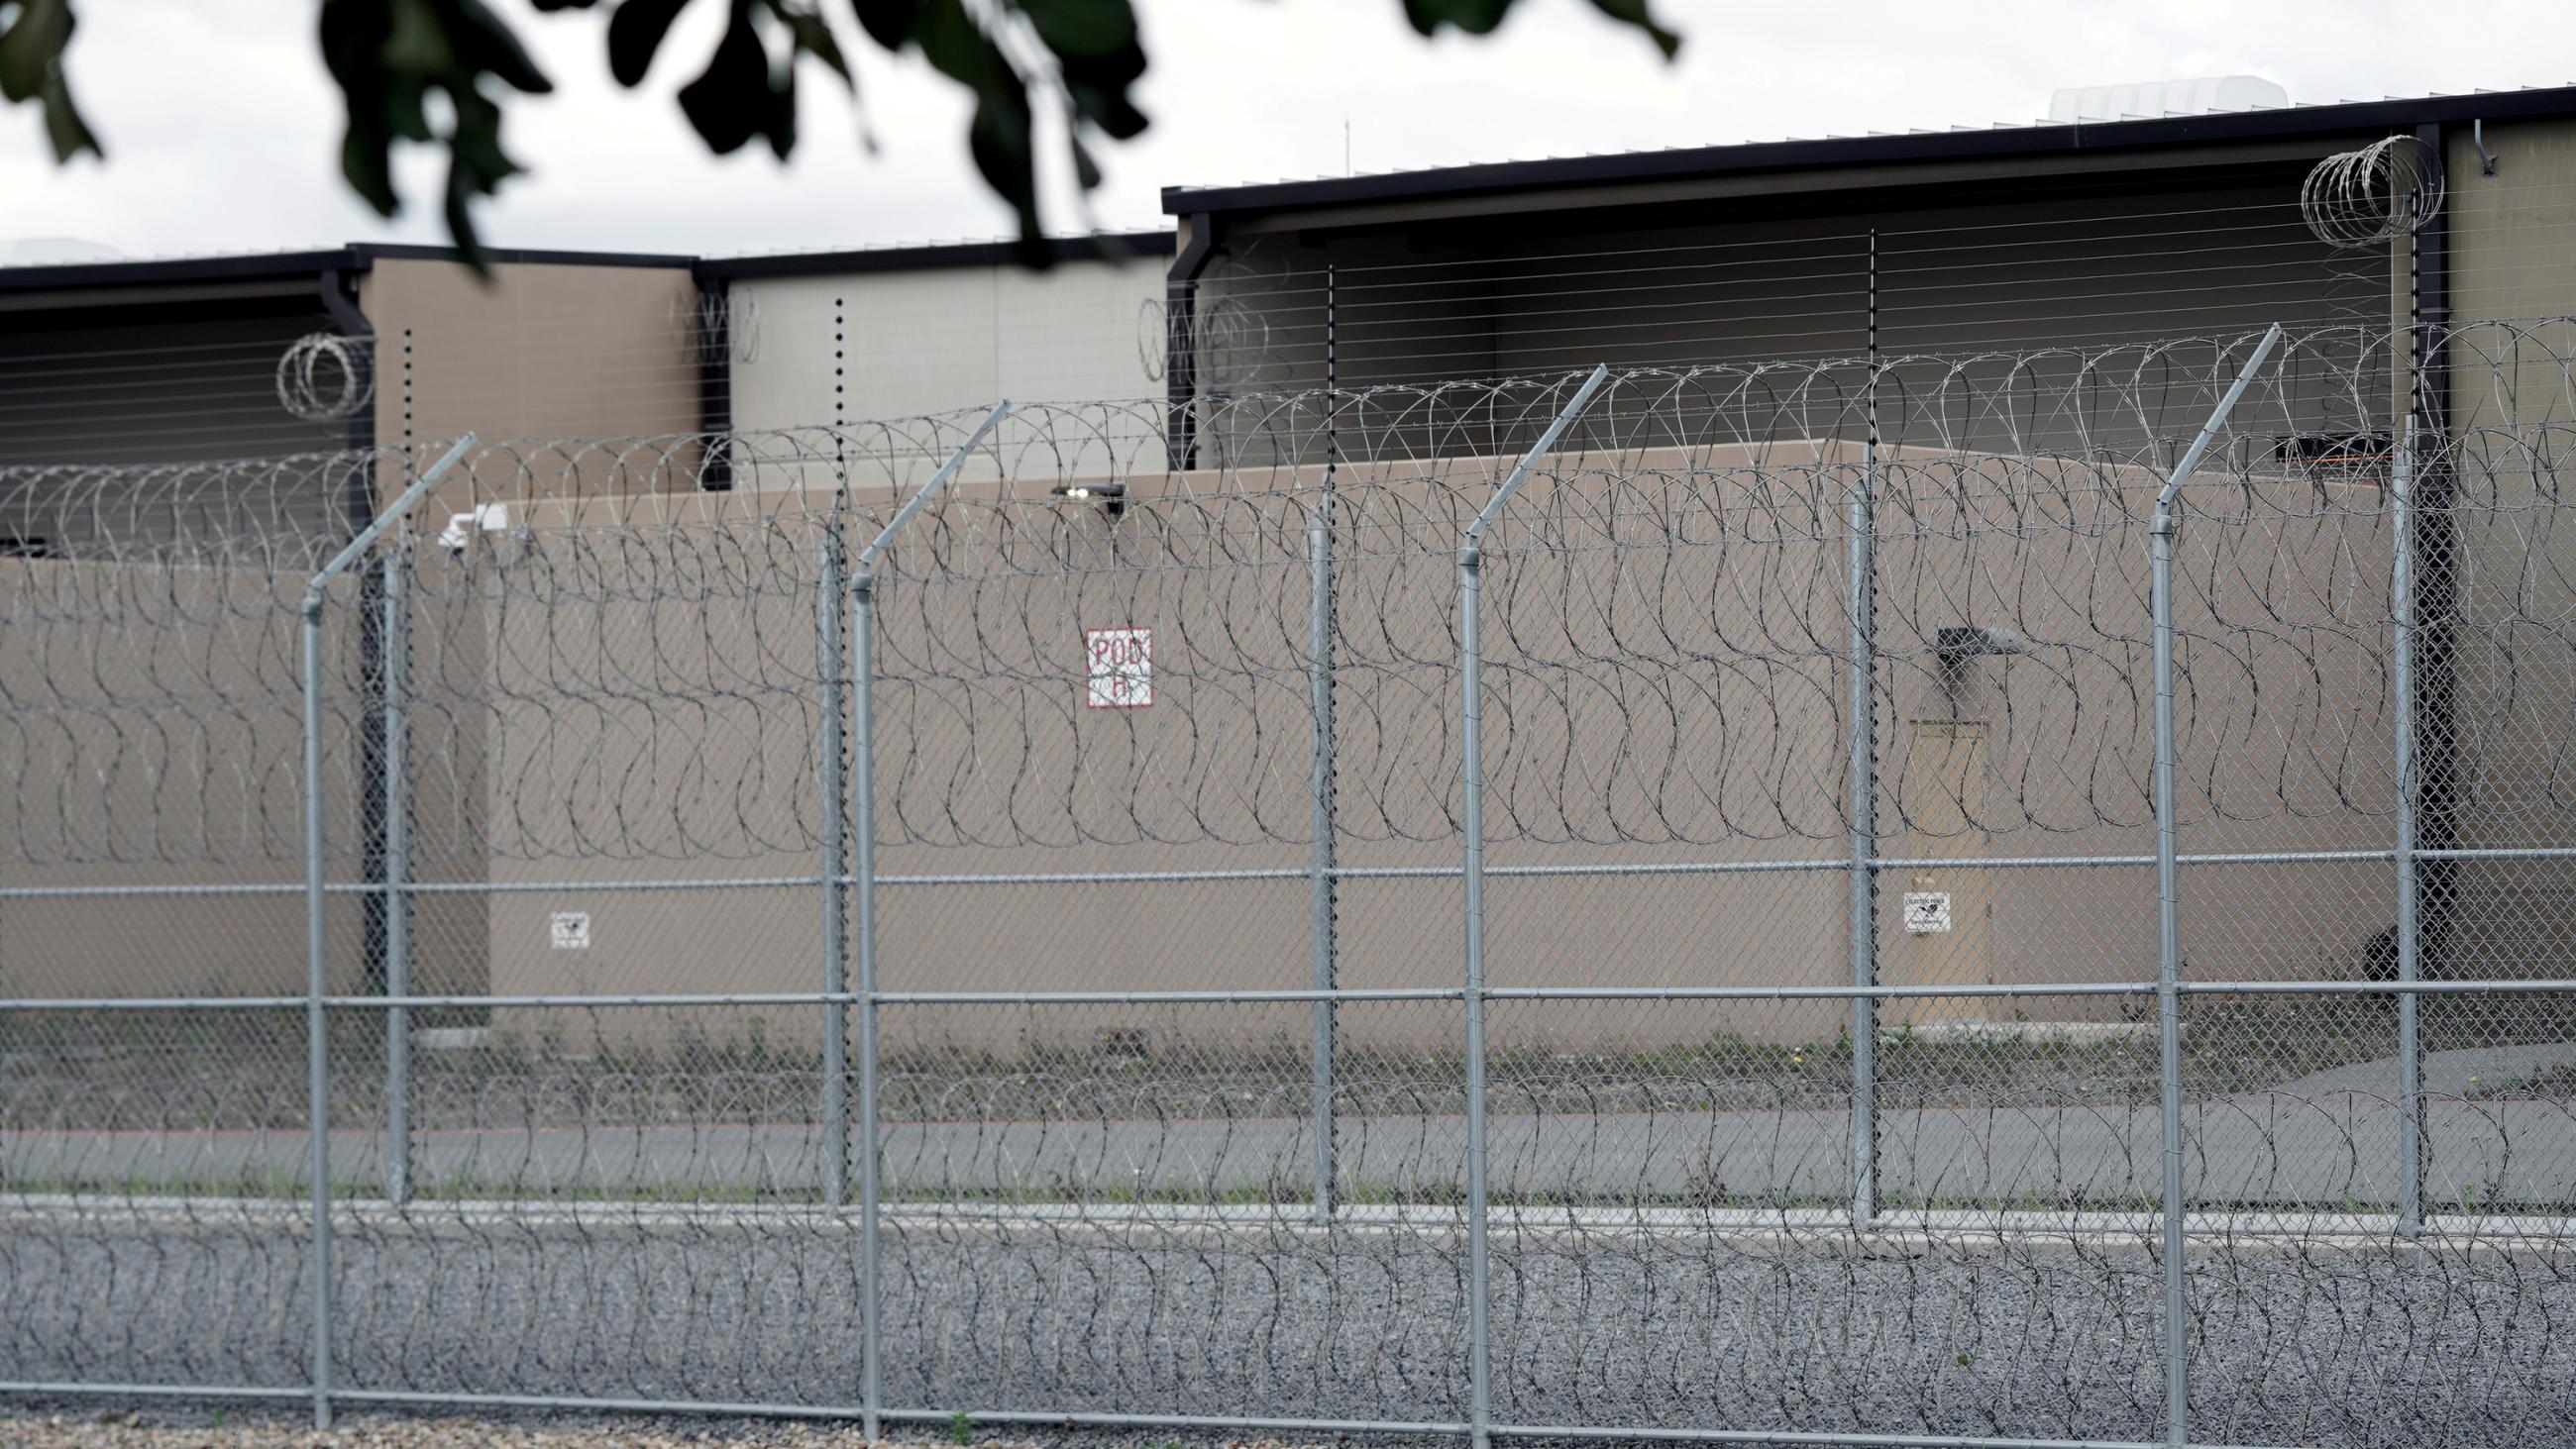 The photo shows a lockup from outside its perimeter barbed wire fence. 